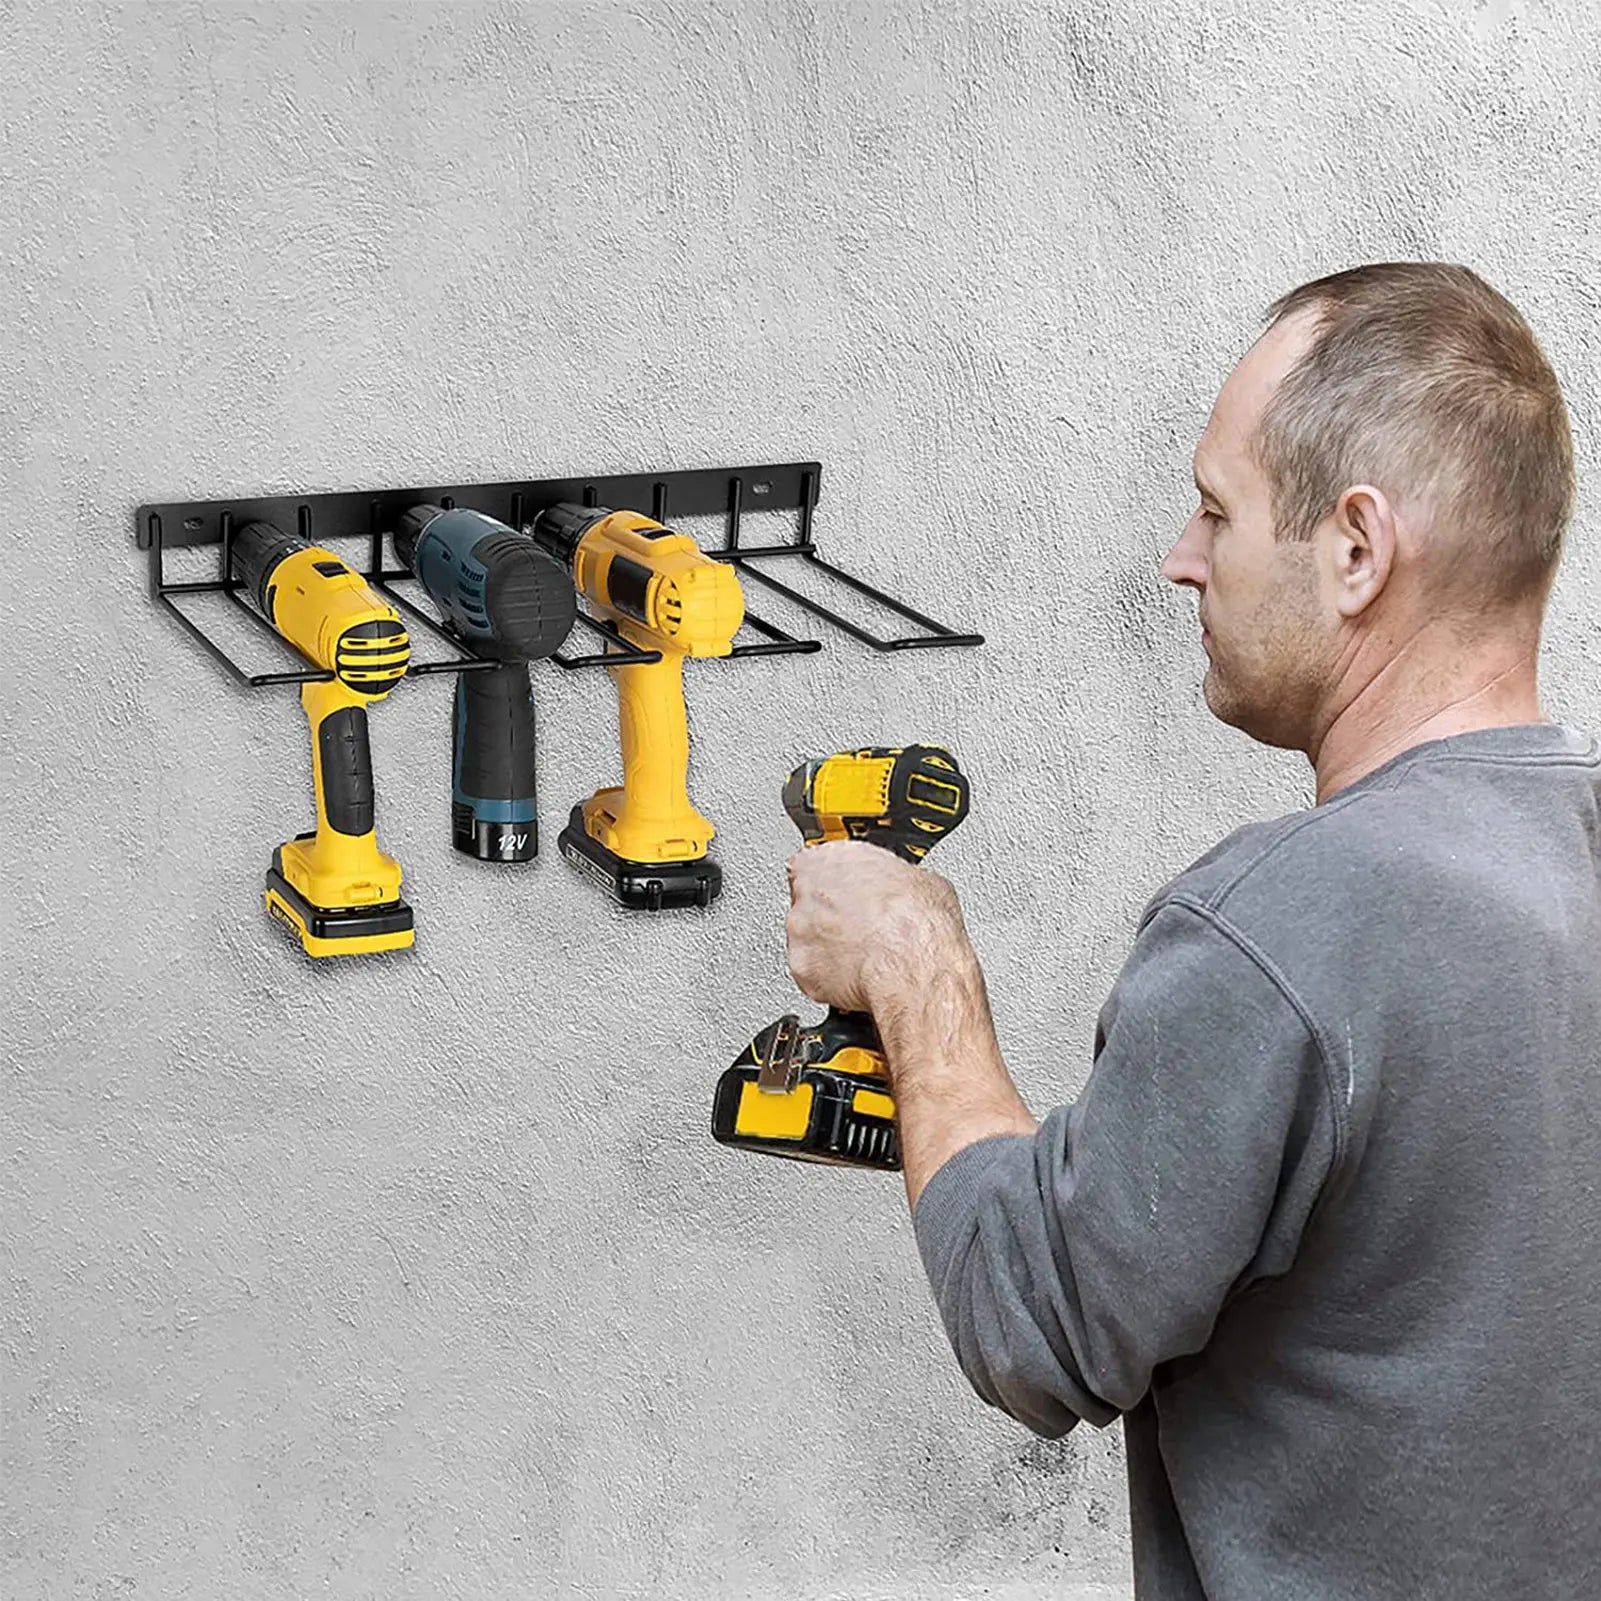 Power Tool Rack Electric Drill Holder Wall Mount Organizer Wrench Tool Workshop Screwdriver Power Storage Shelf Accessories